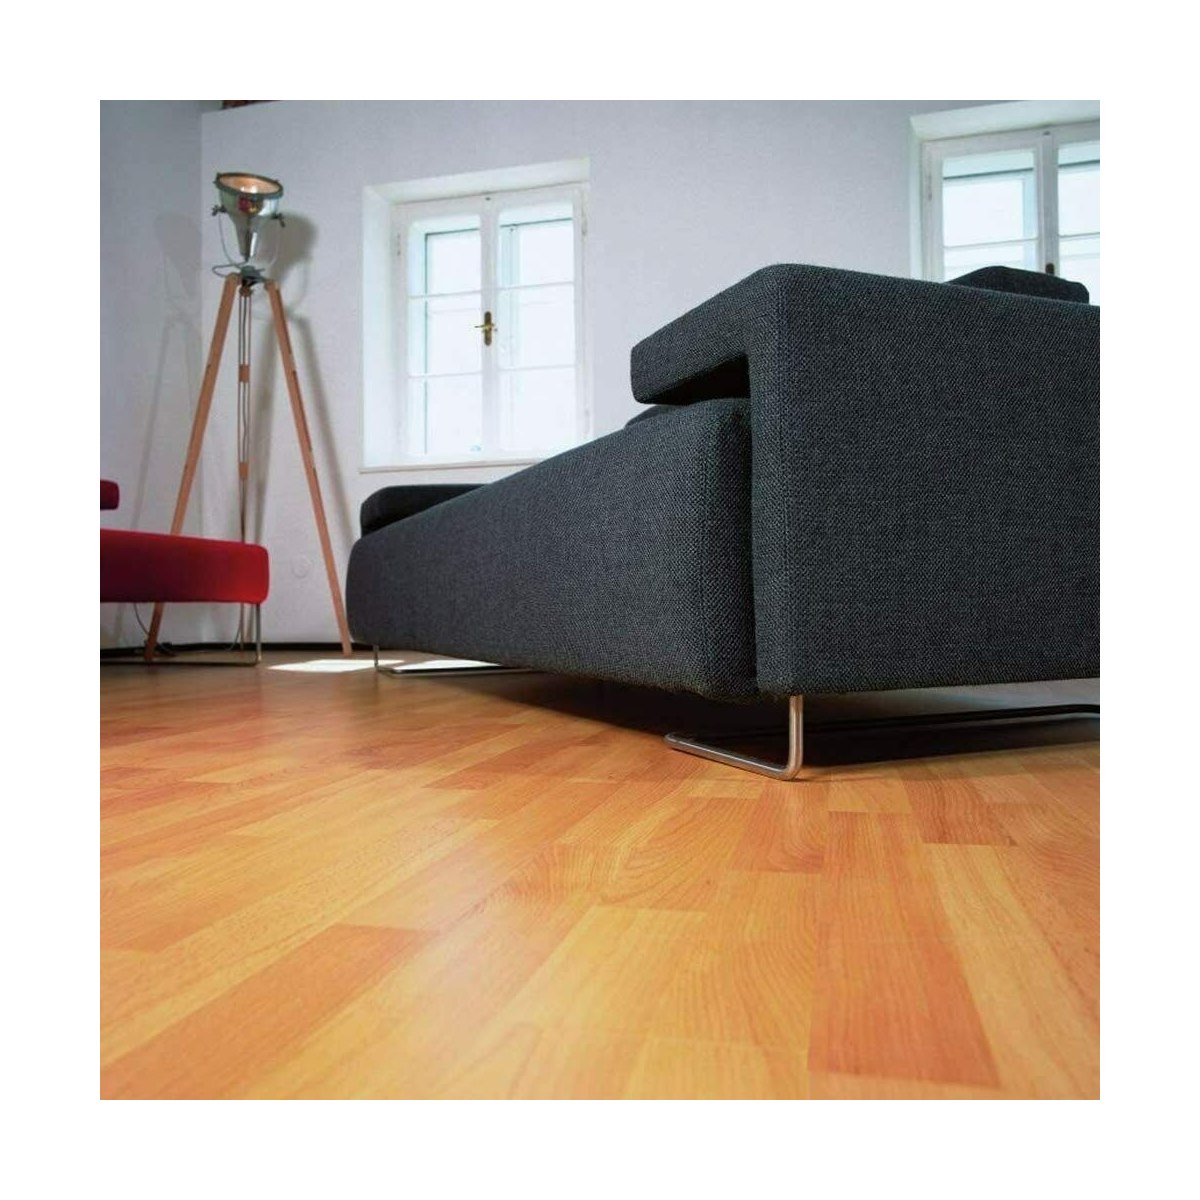 Protective Treatment for Laminate Floors